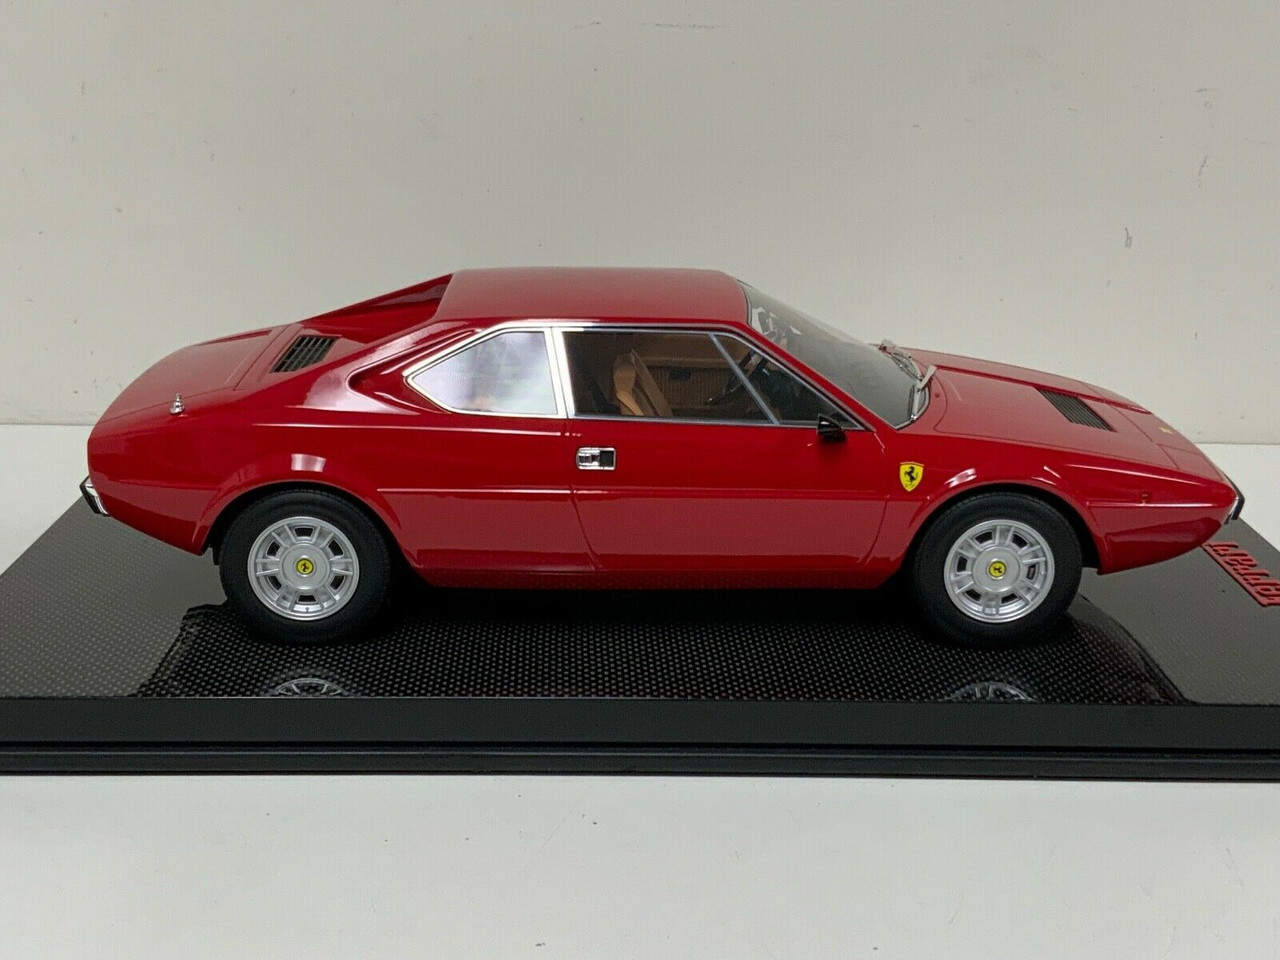 1/12 Top Marques Ferrari 308 GT4 Dino (Red) with Carbon Fiber Base Display Case Resin Car Model